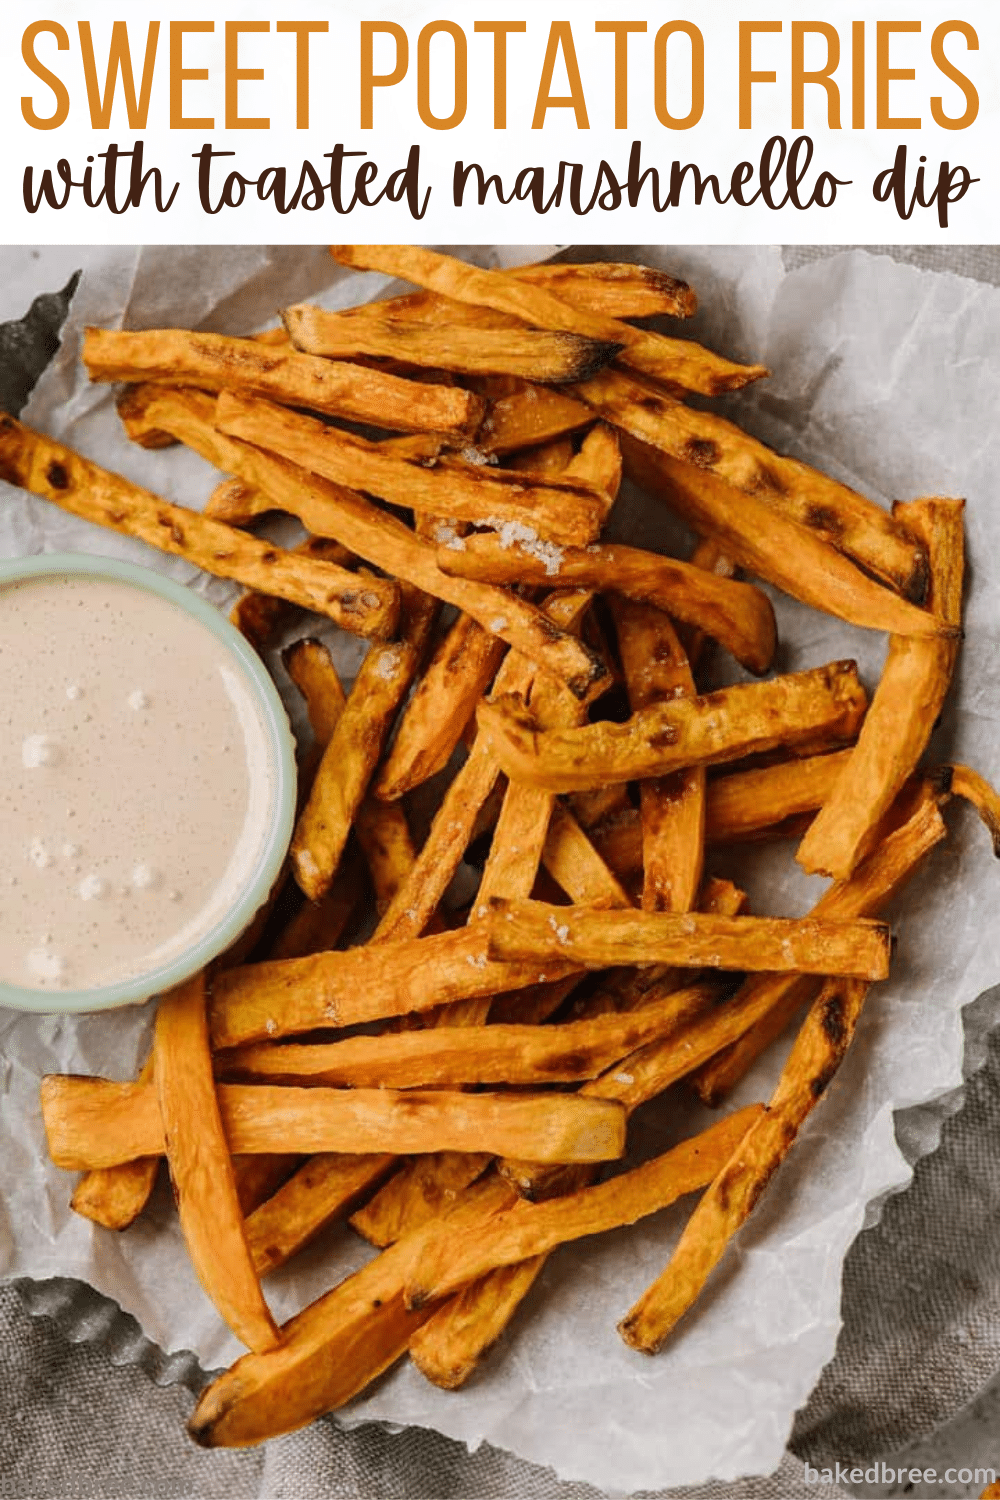 Baked Sweet Potato Fries with Toasted Marshmallow Dip